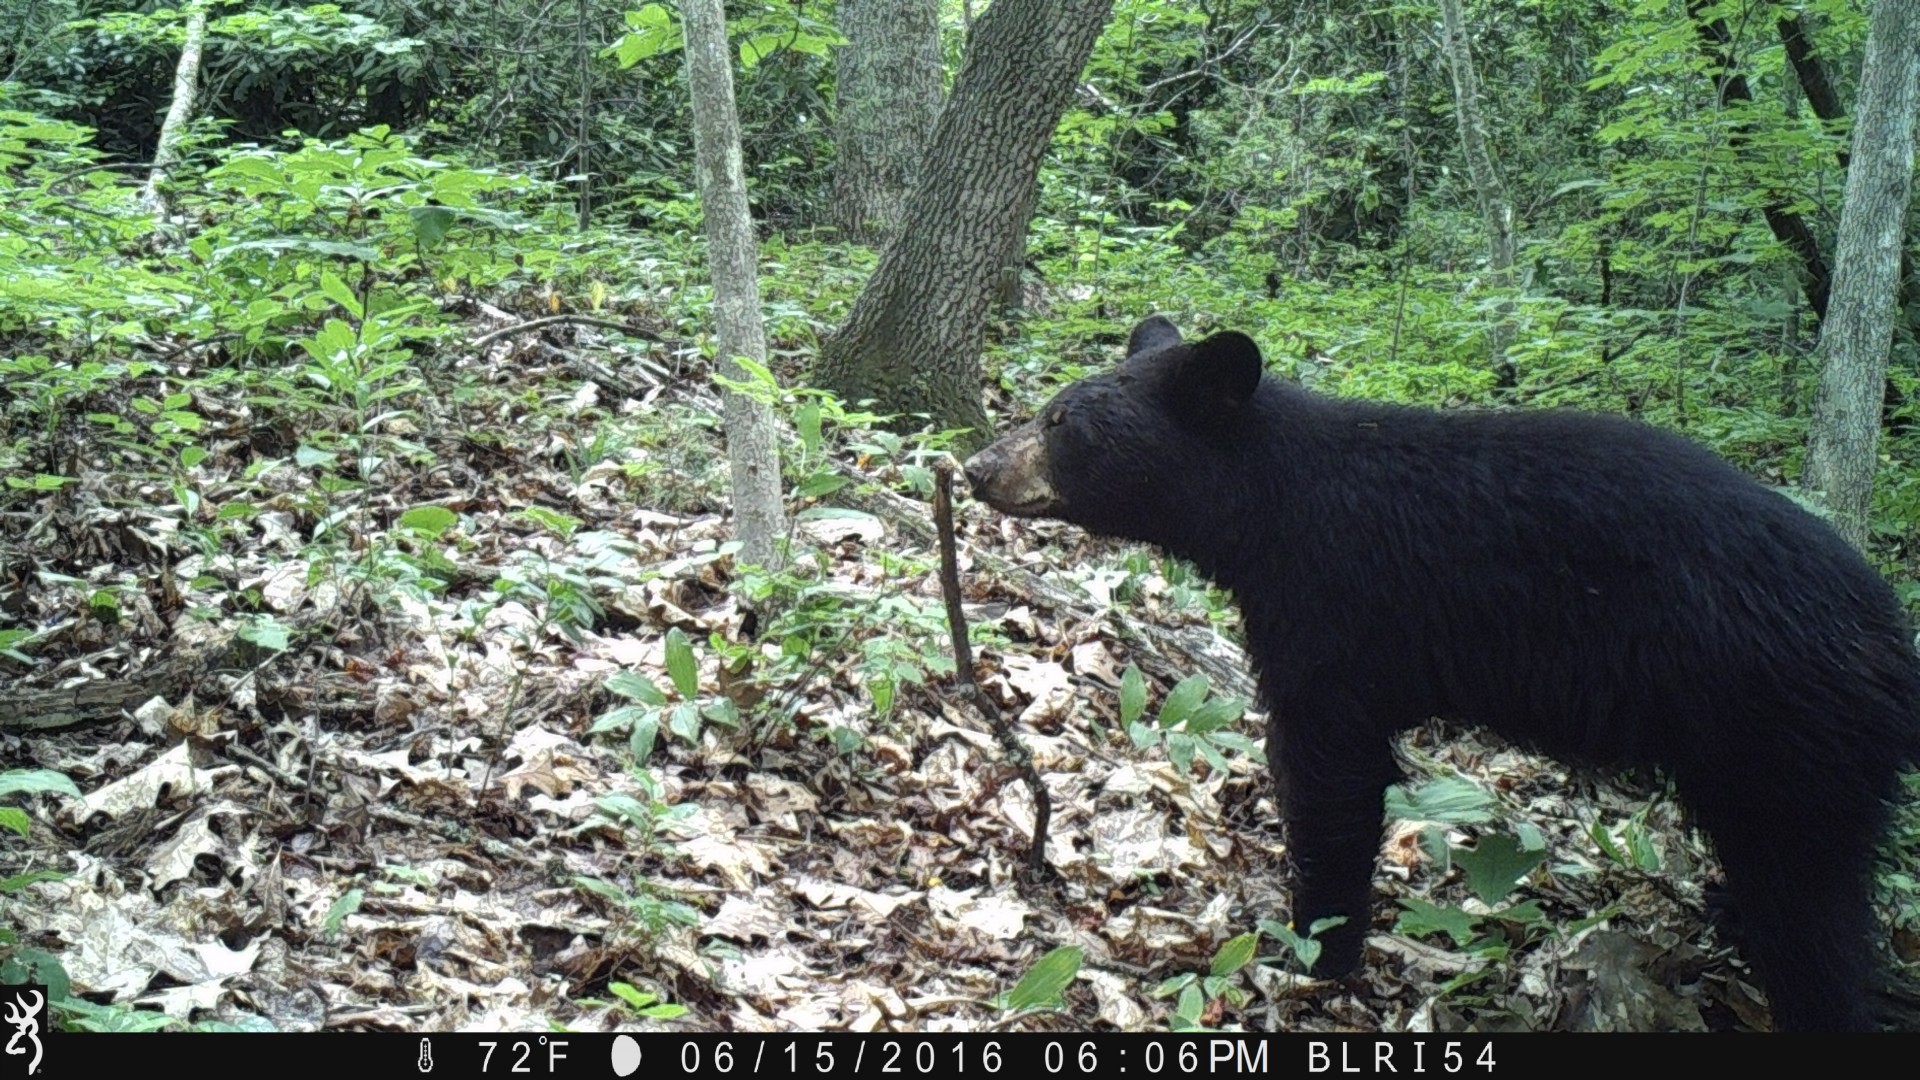 Remote cameras captured an image of a bear along the Blue Ridge Parkway.